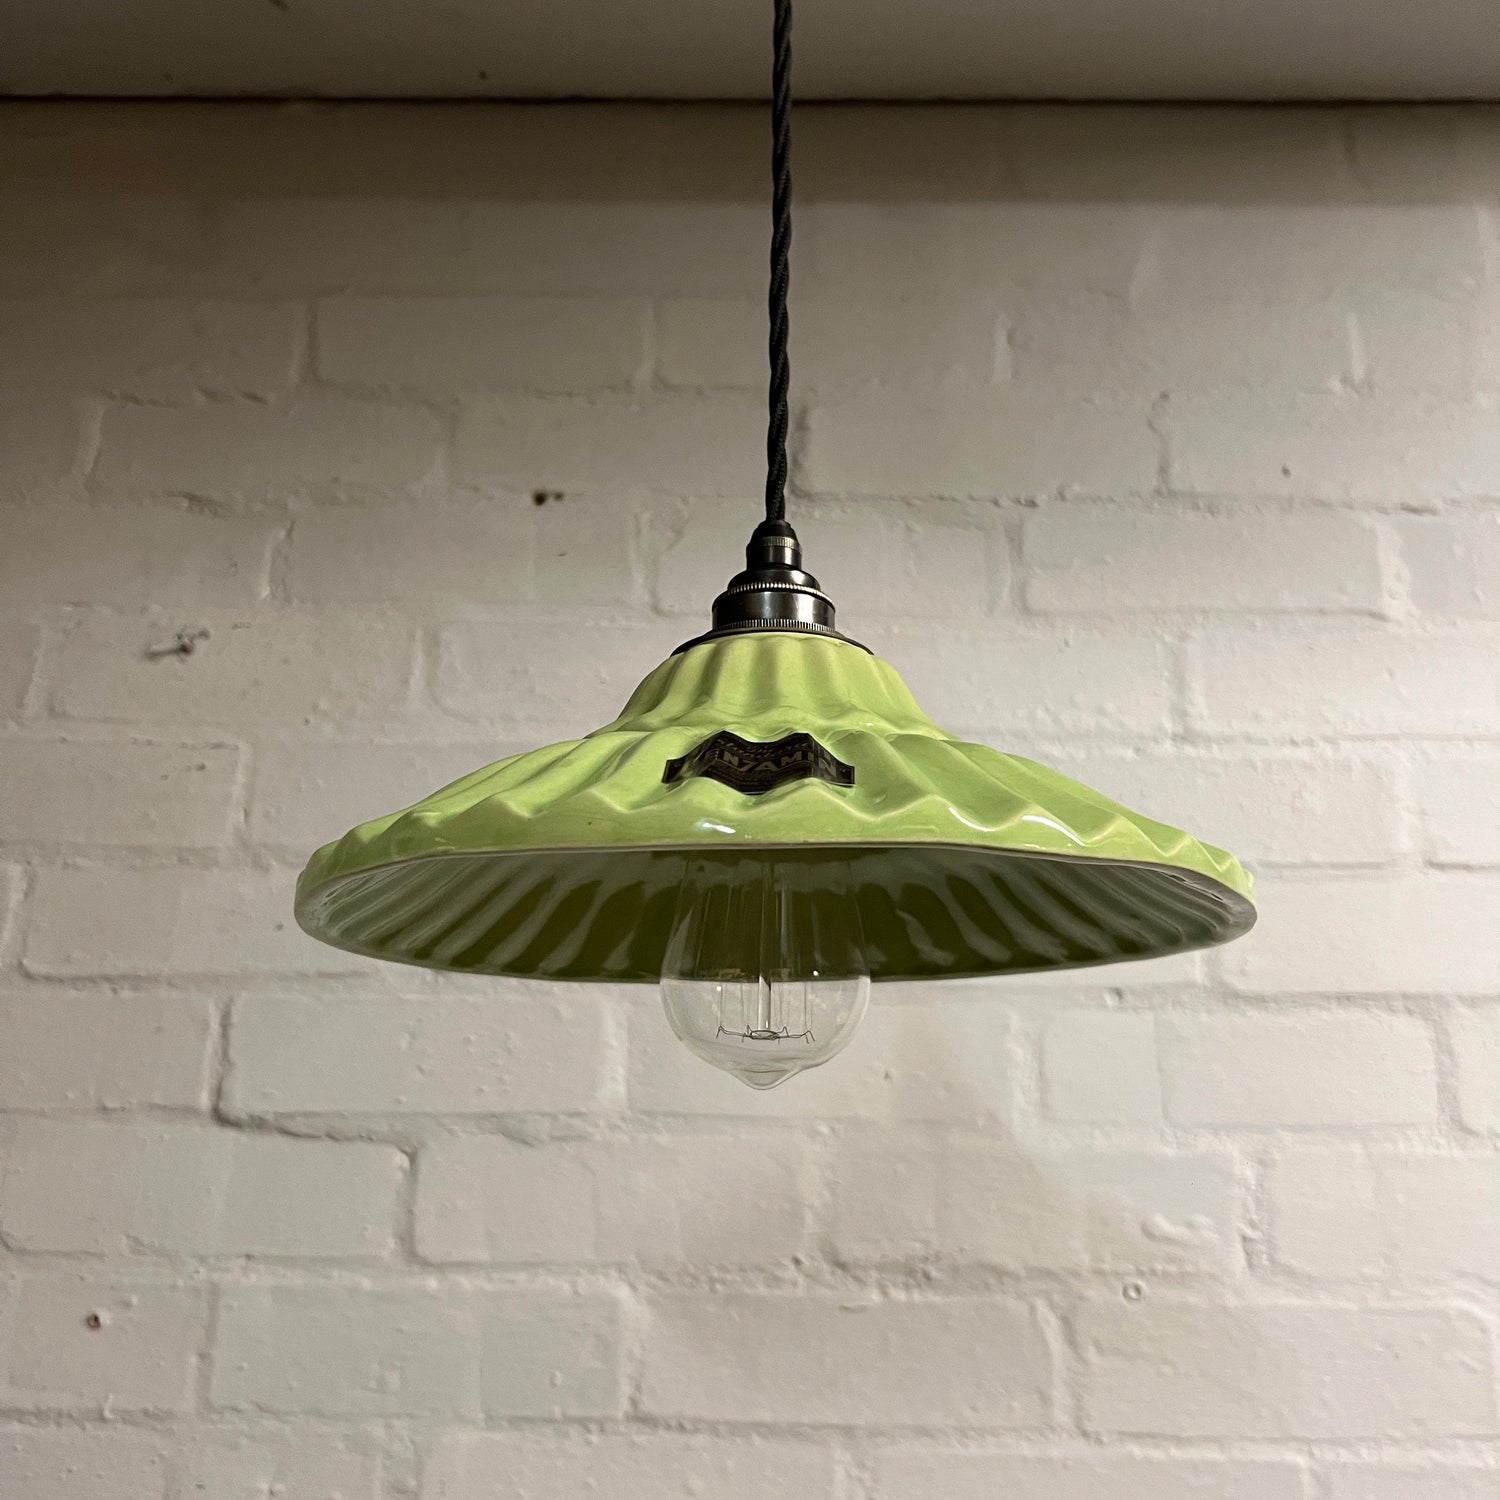 Lenwade ~ Lime Green Ceramic Shade Light Ceiling Dining Room Kitchen Table Vintage Edison Filament Lamps Pendant Bar 10 Inch